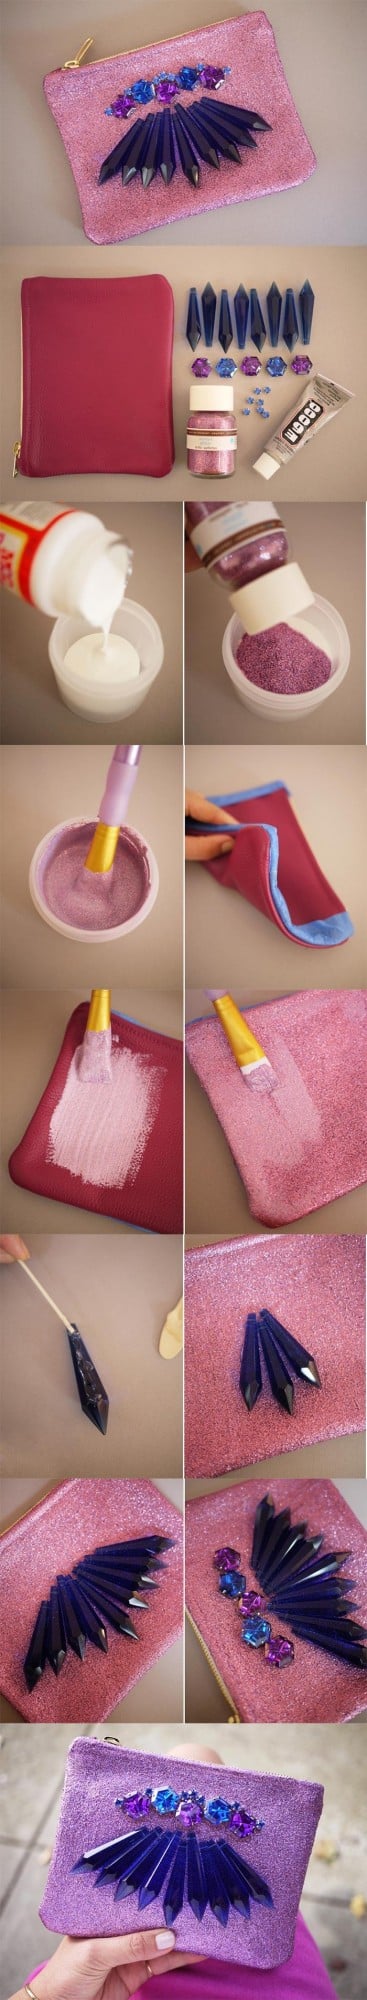 24 Amazing and Easy DIY Shoes and Bags Projects (3)